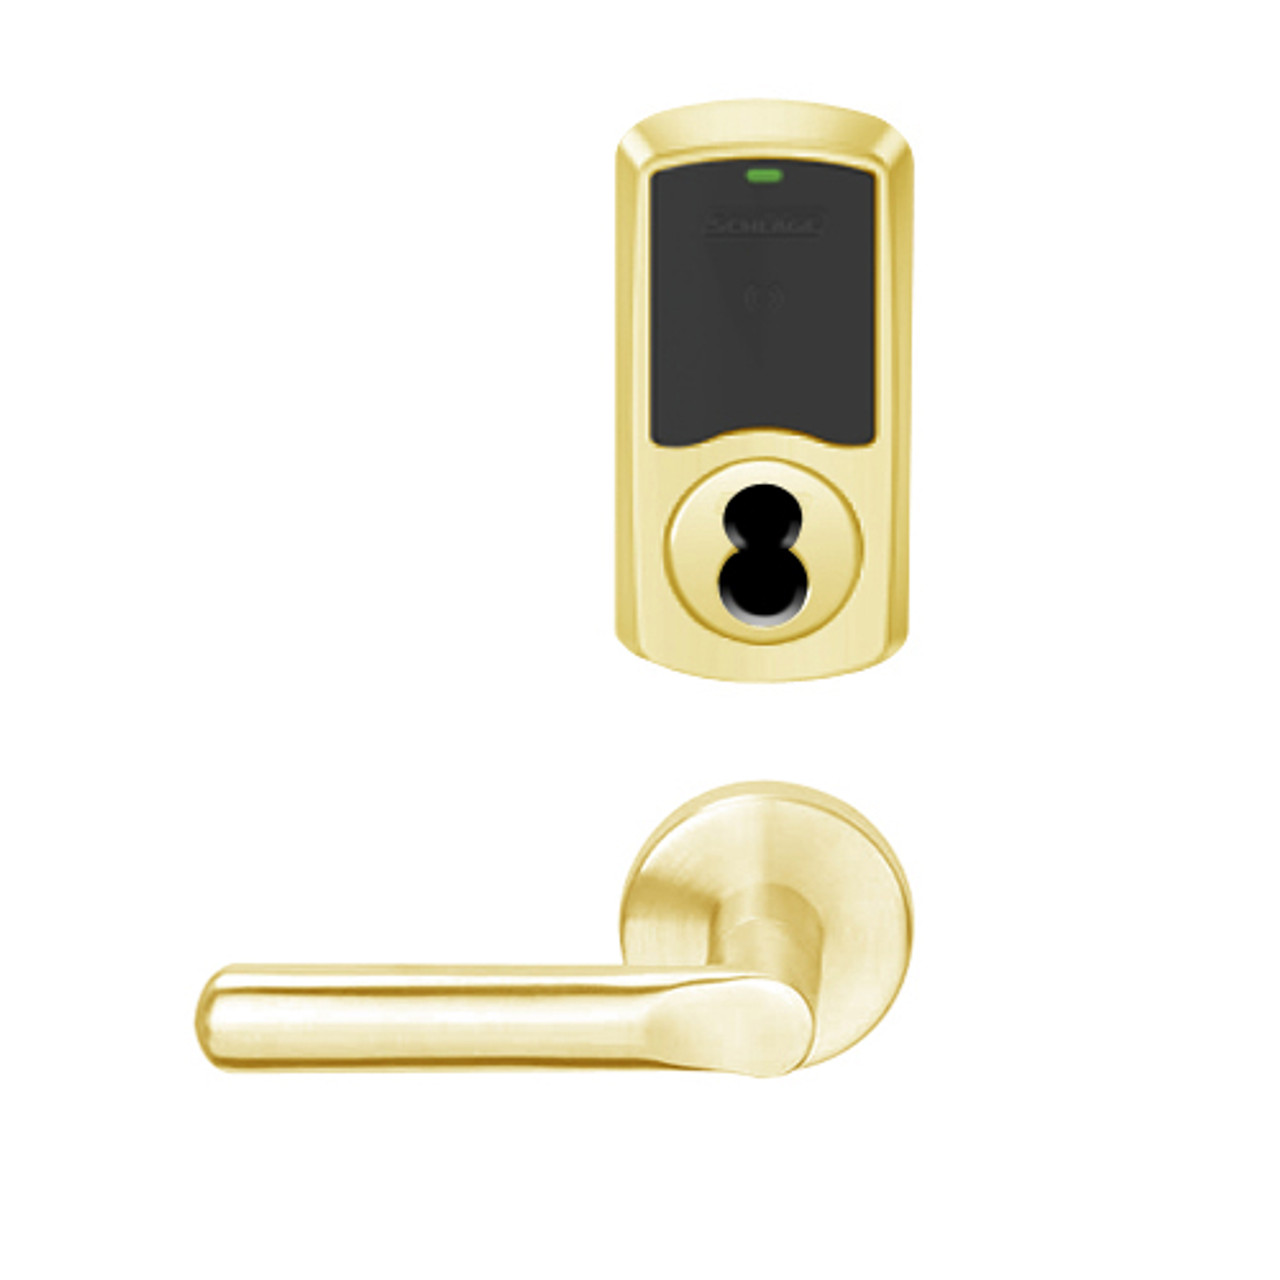 LEMB-GRW-J-18-605-00C Schlage Privacy/Office Wireless Greenwich Mortise Lock with LED Indicator and 18 Lever Prepped for FSIC in Bright Brass